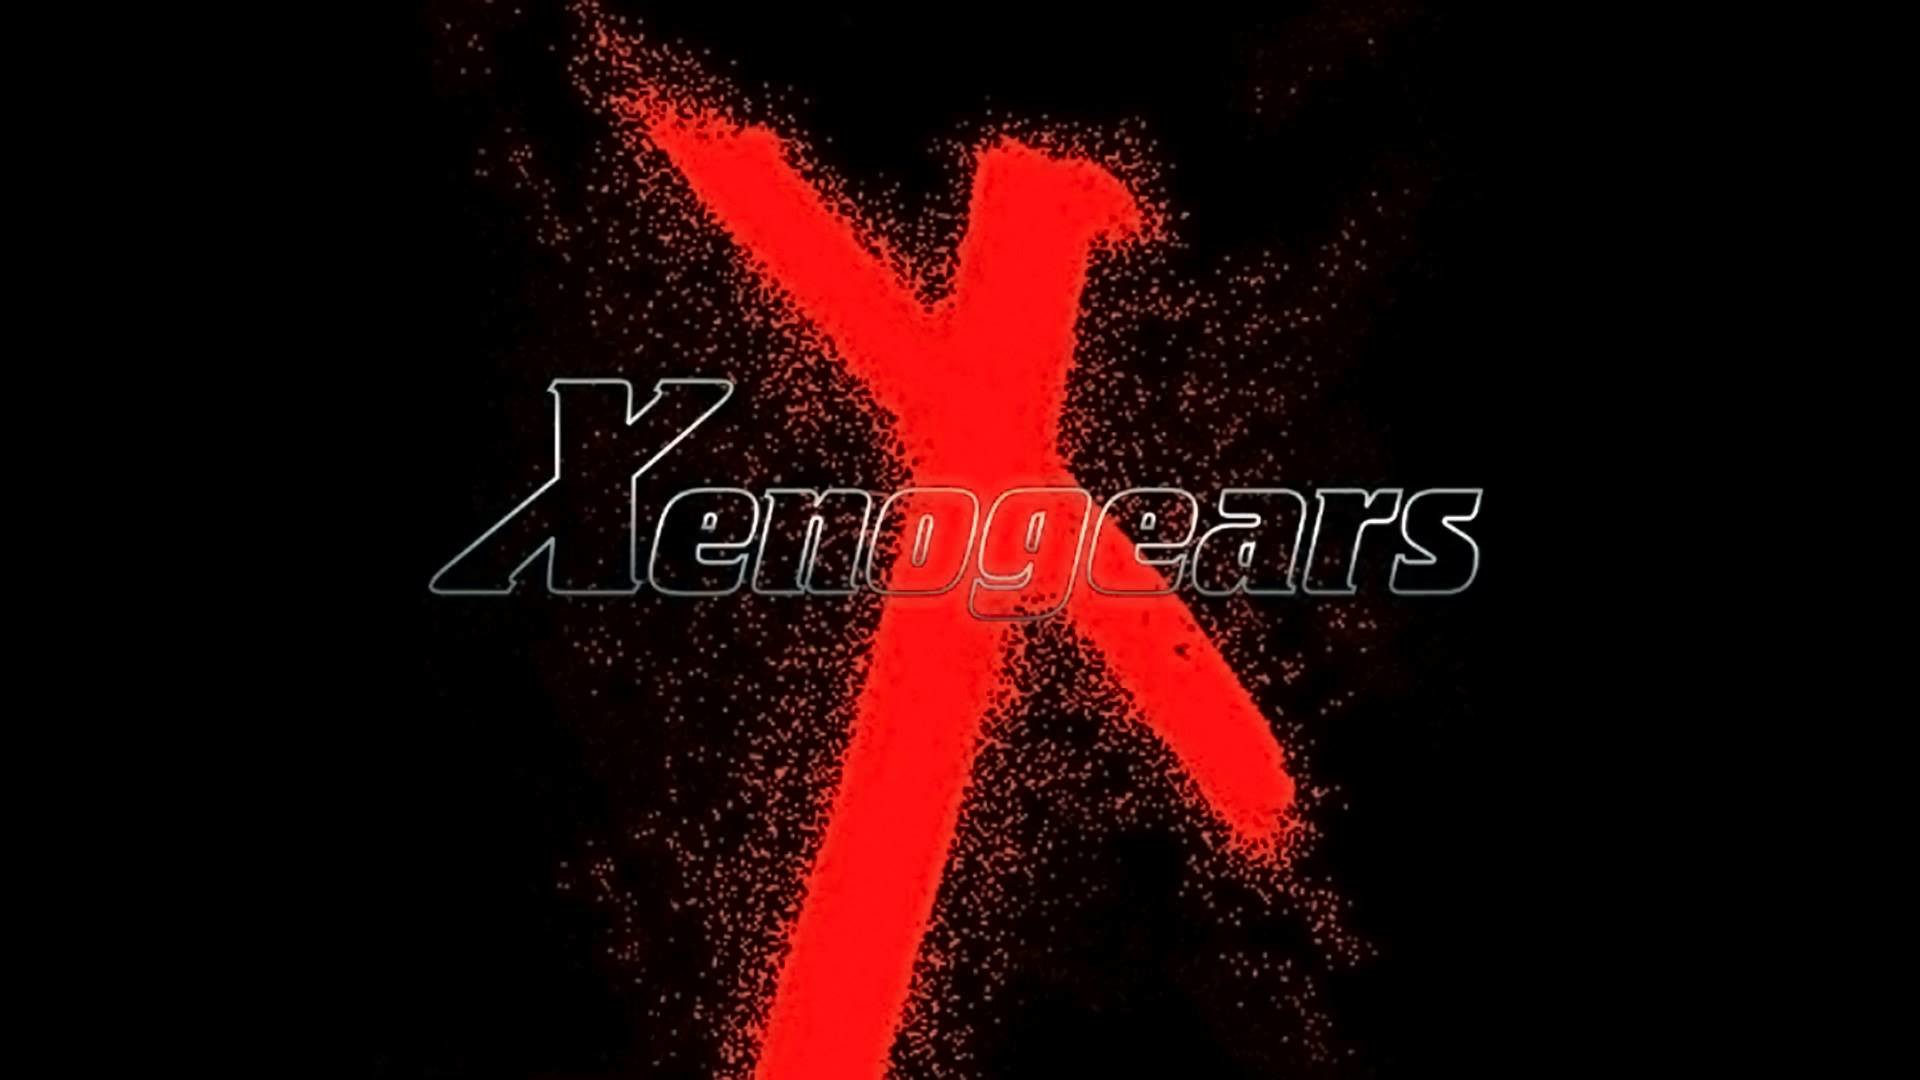 1920x1080 Emotions - Xenogears Music Extended